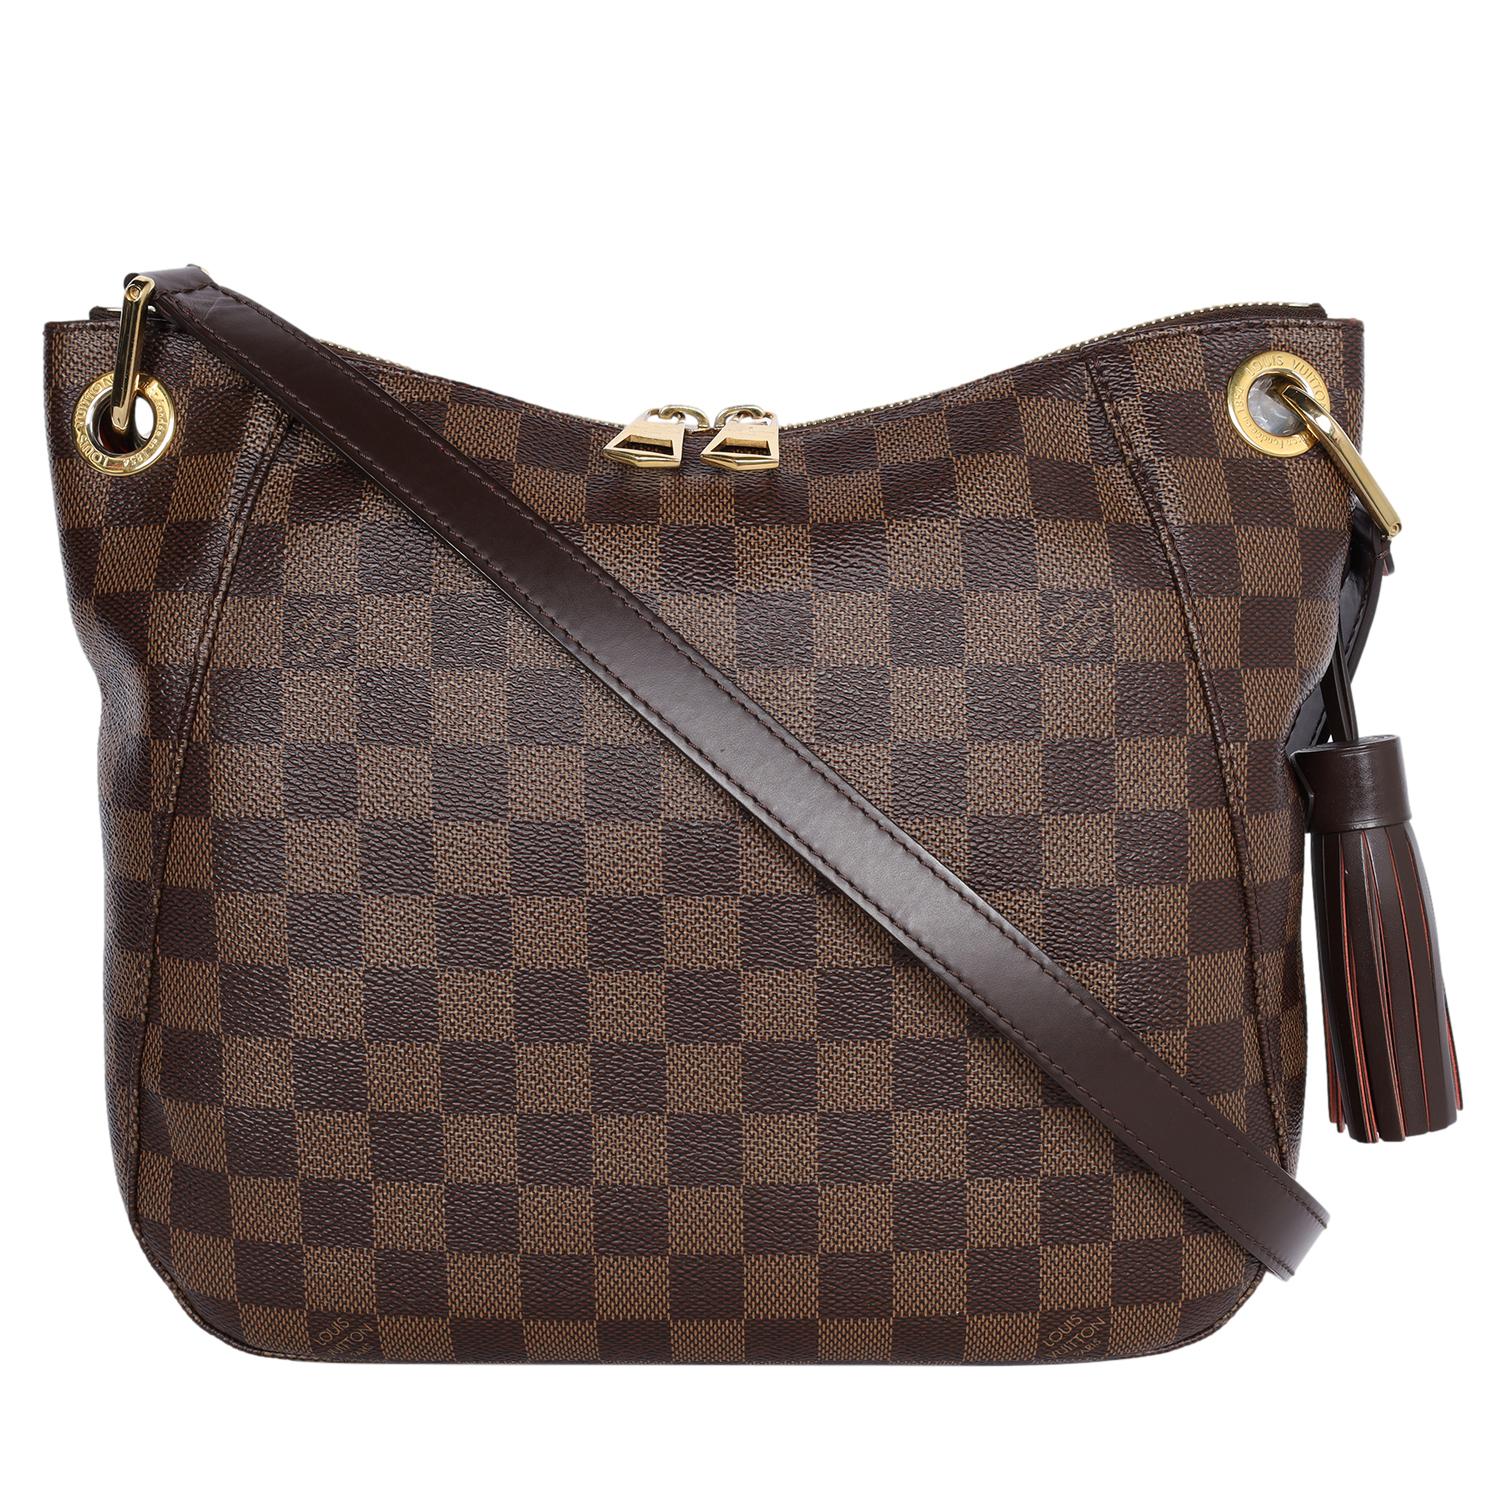 Authentic, pre-loved Louis Vuitton Damier Ebene South Bank Besace crossbody bag. This chic bag features Louis Vuitton Damier Ebene coated canvas in brown, with a front slip patch pocket. The bag features an adjustable dark brown leather shoulder